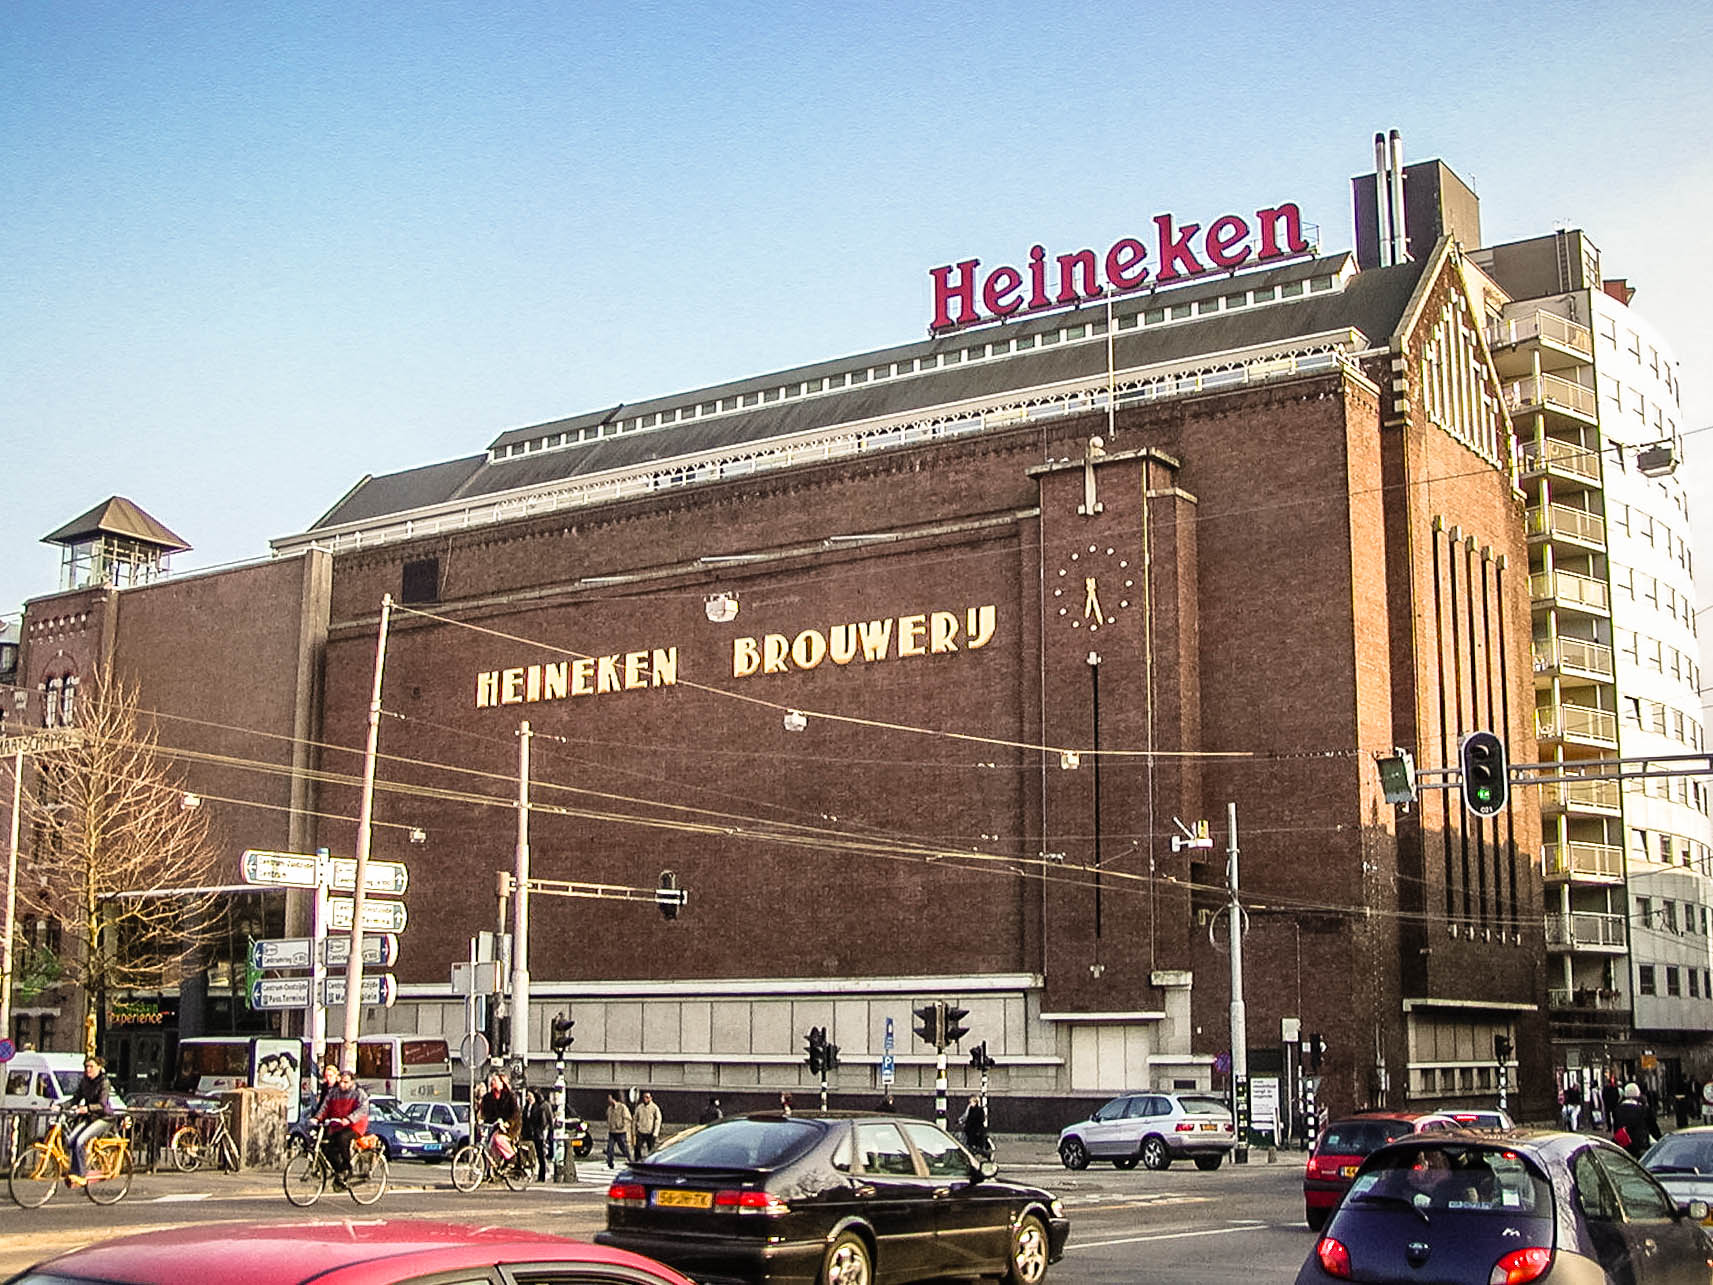 Previously the Haystack Brewery, Gerard Adriaan Heineken bought it in 1864and turned it into his own brewery, named after himself